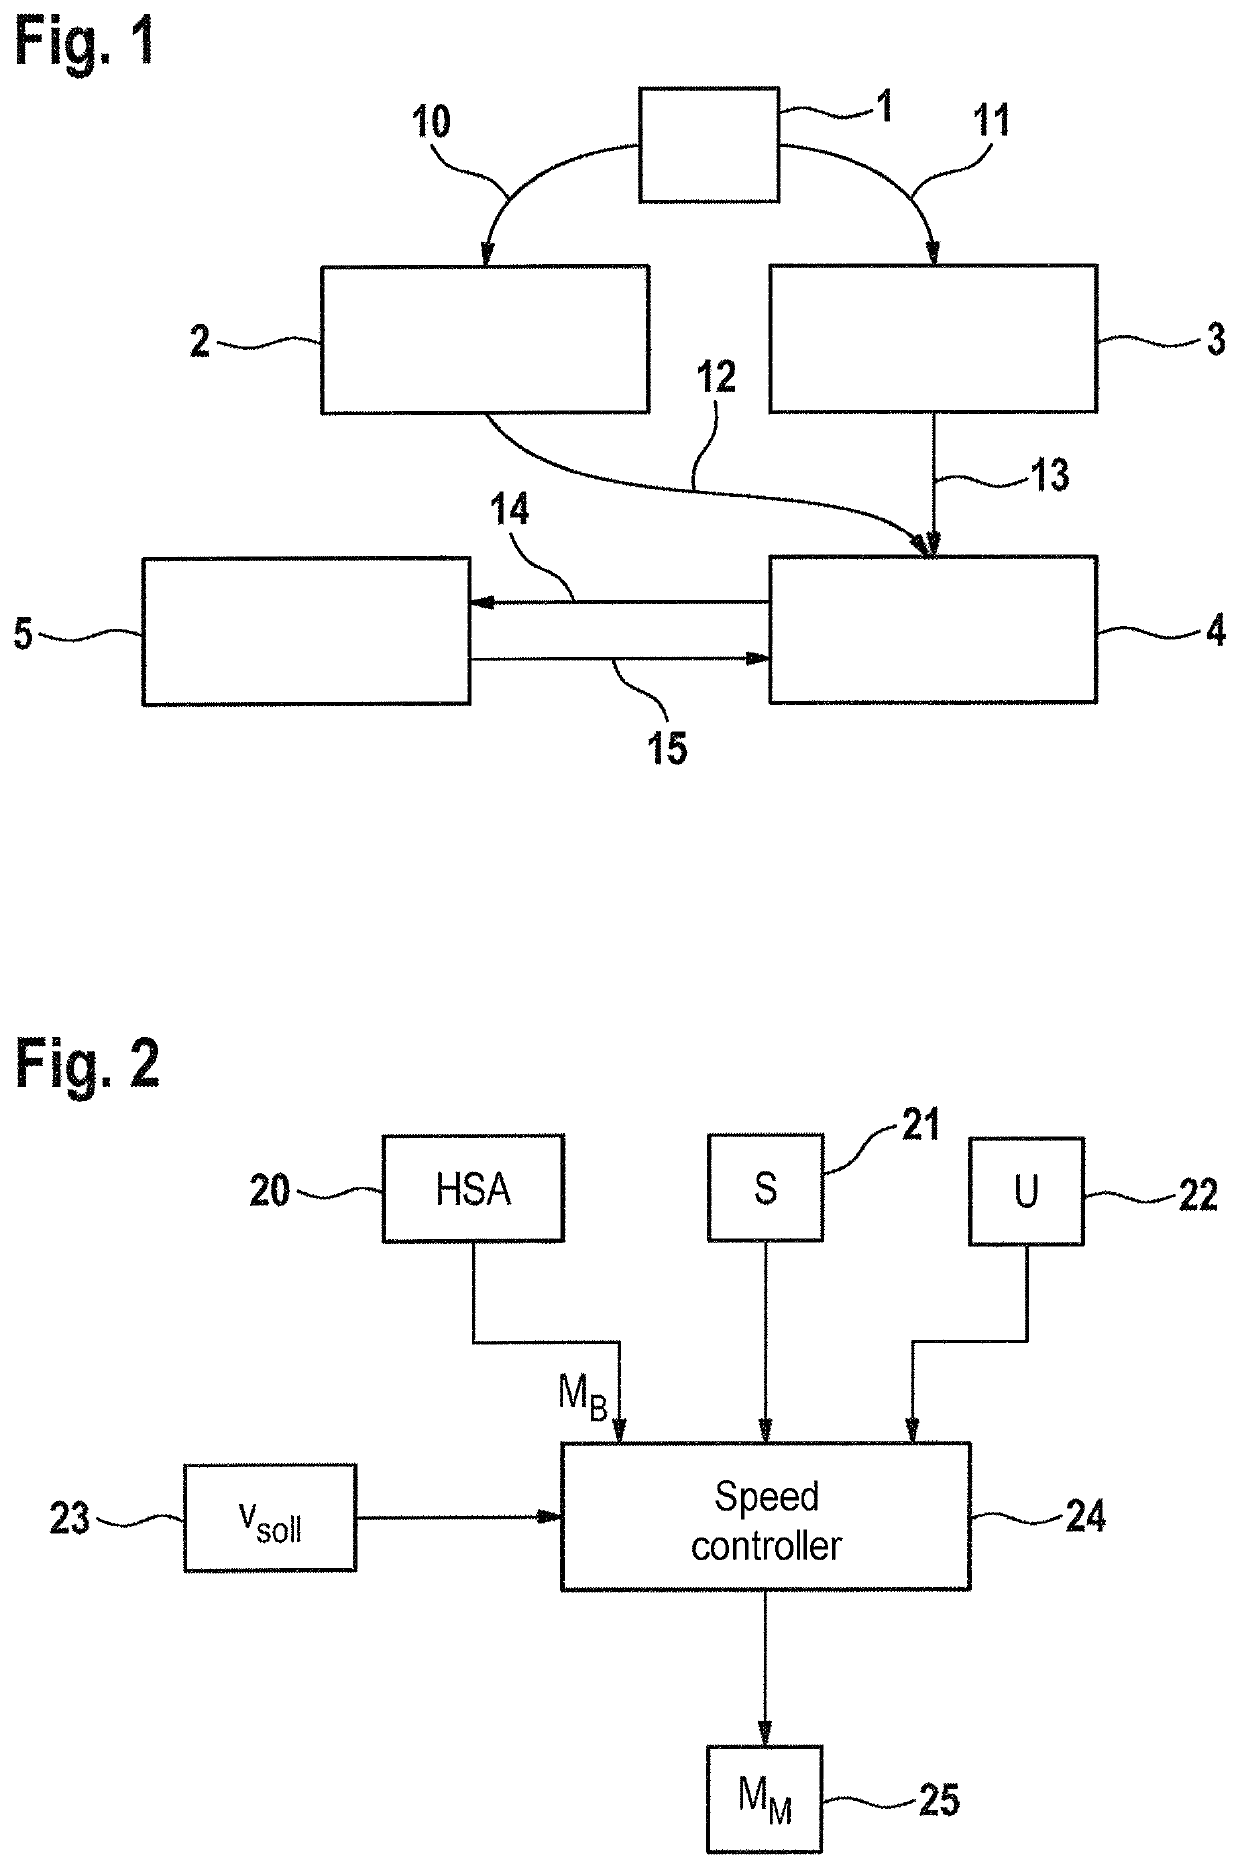 Method for a speed controller